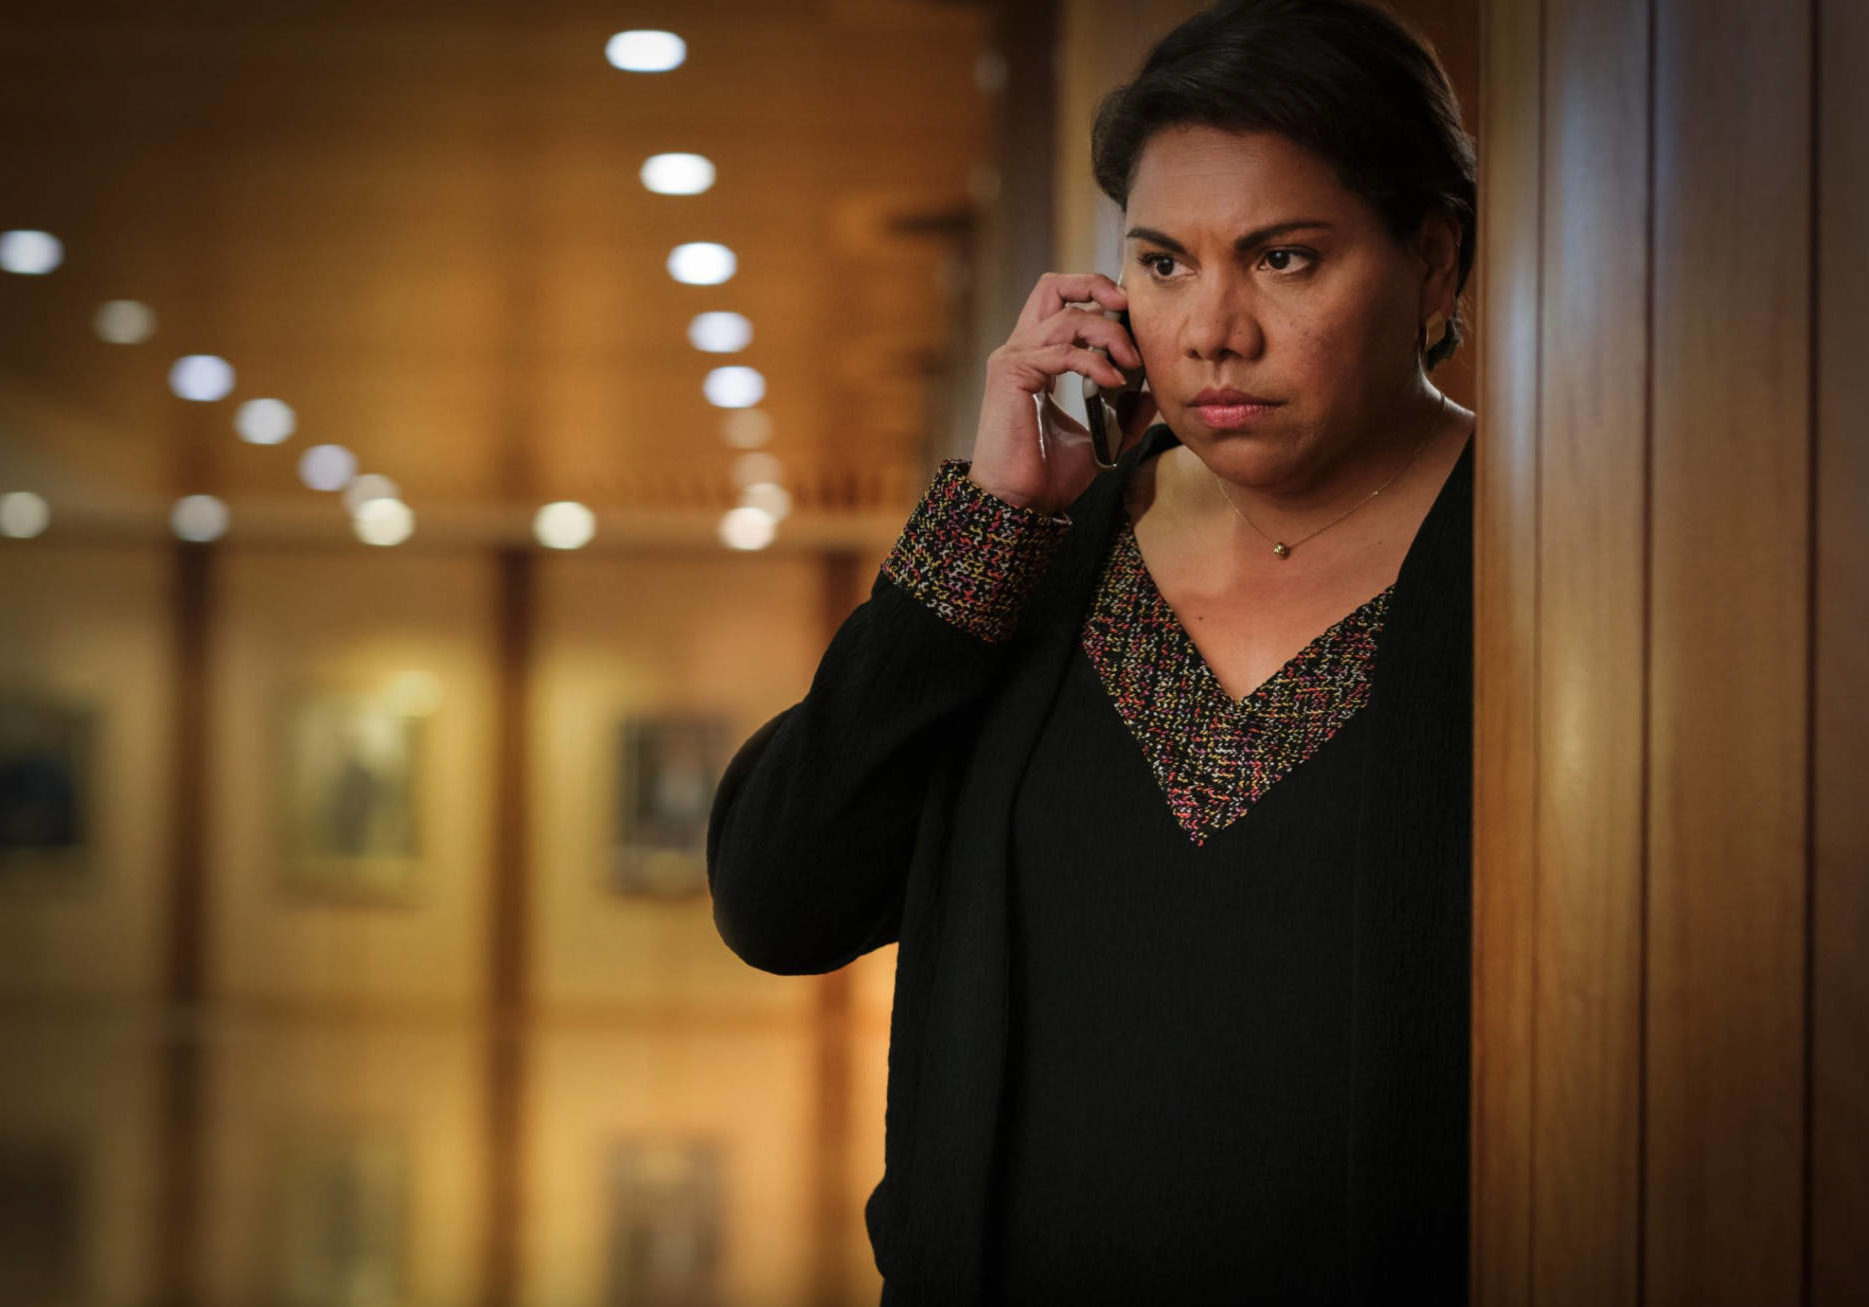 Deborah Mailman plays Alex Irving in TOTAL CONTROL. In the image she is looking series while on a phone call in a corridor